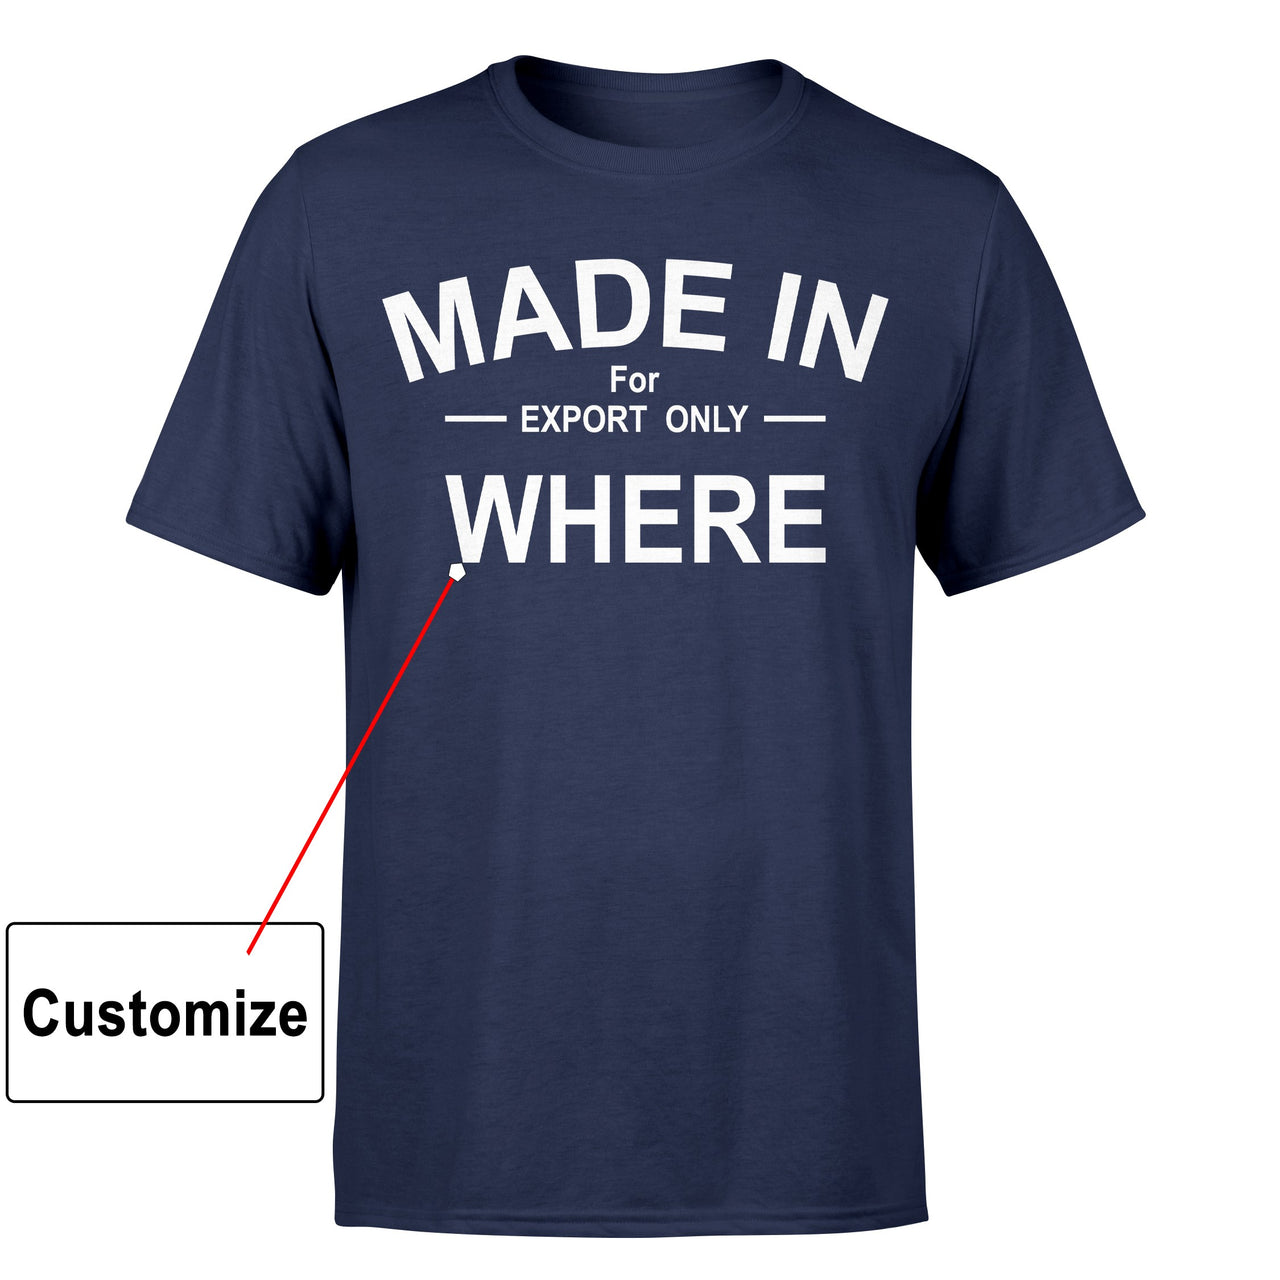 Customizable MADE IN Designed T-Shirts